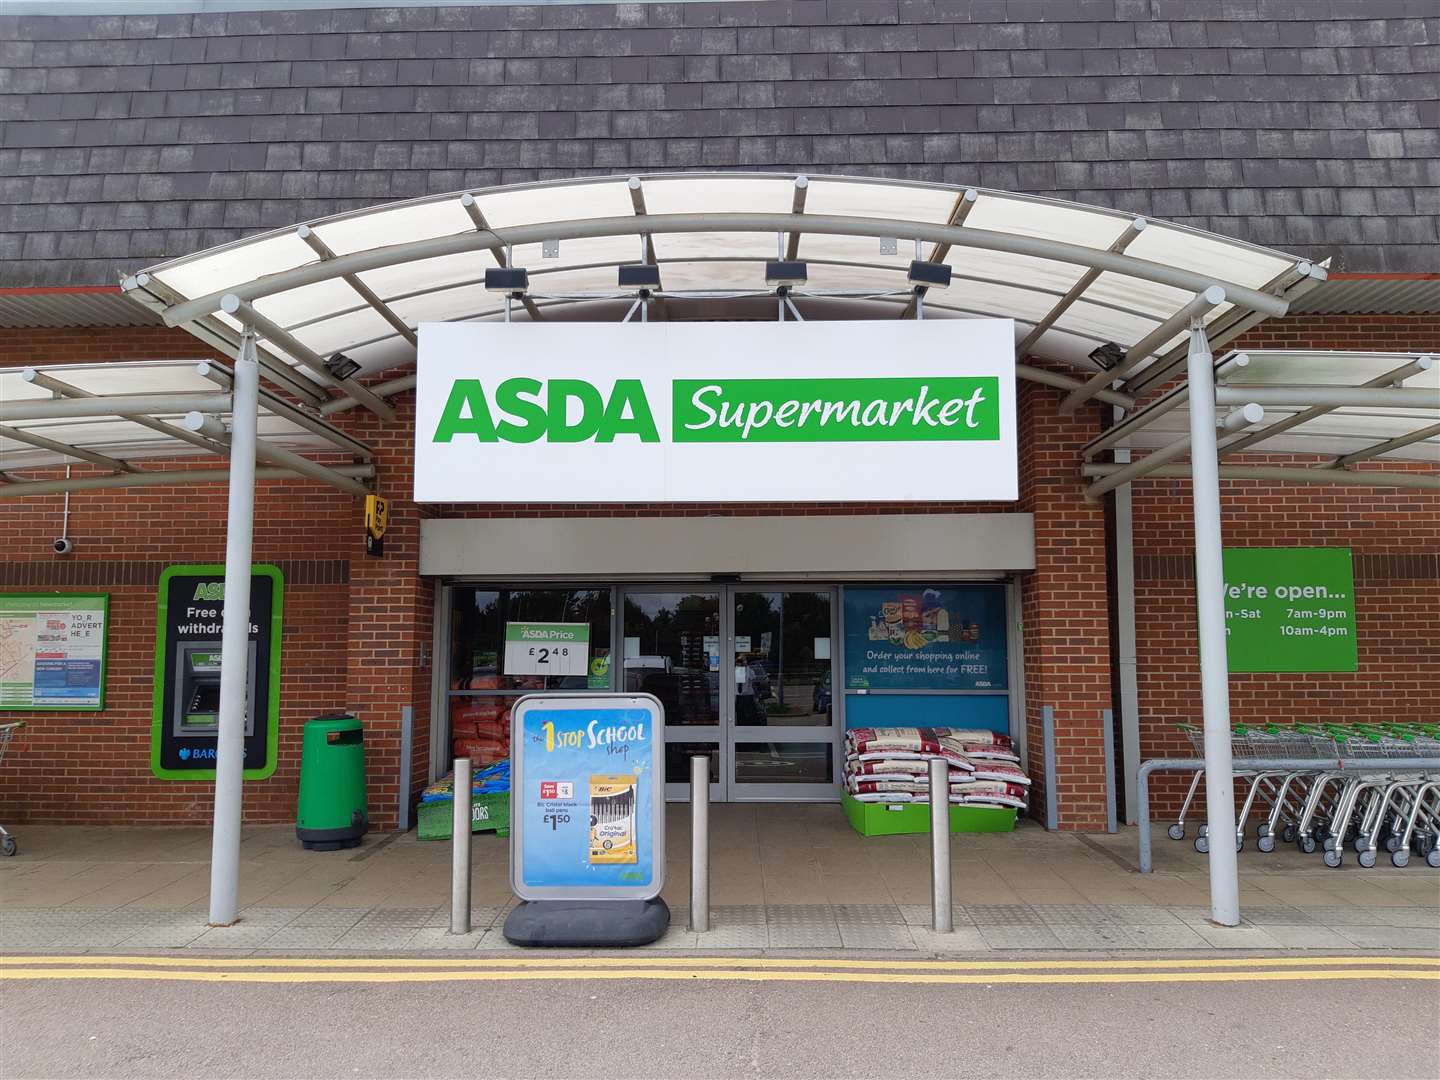 Asda stores across the county are taking part in the scheme